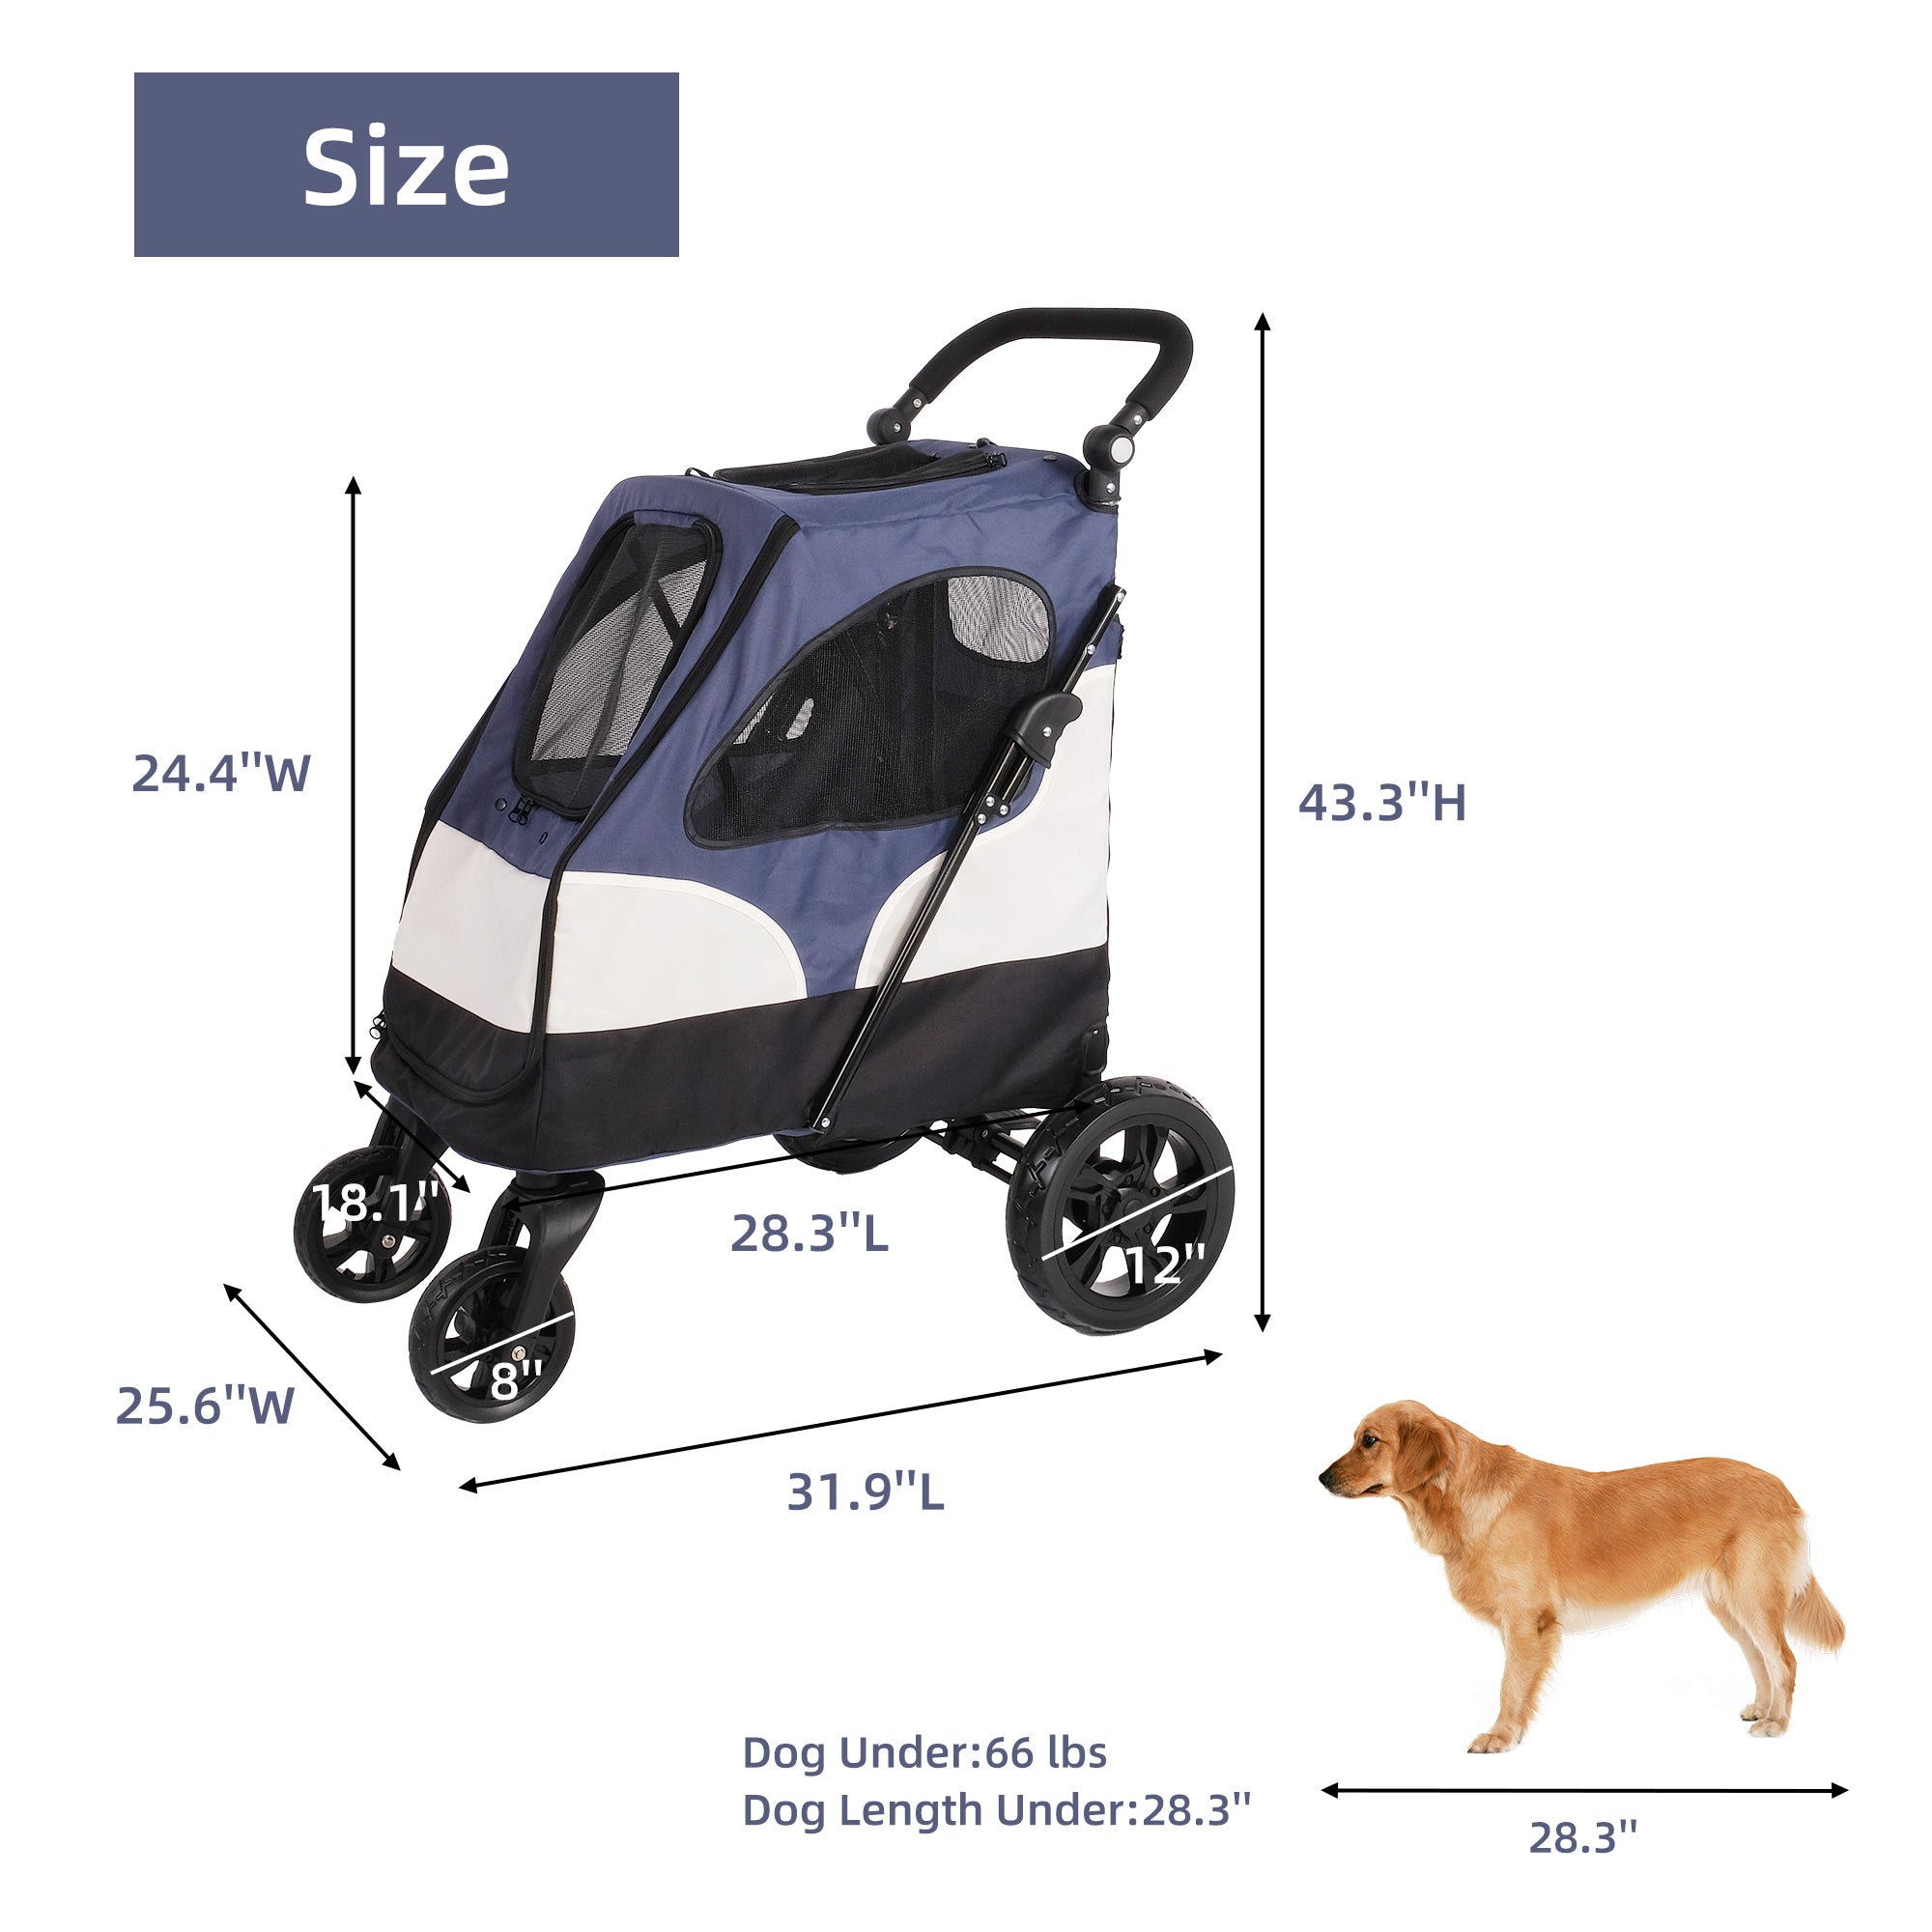 LUCKYERMORE Foldable Travel Dog Stroller Pet carrier with Adjustable Handle & Mesh Window, Blue